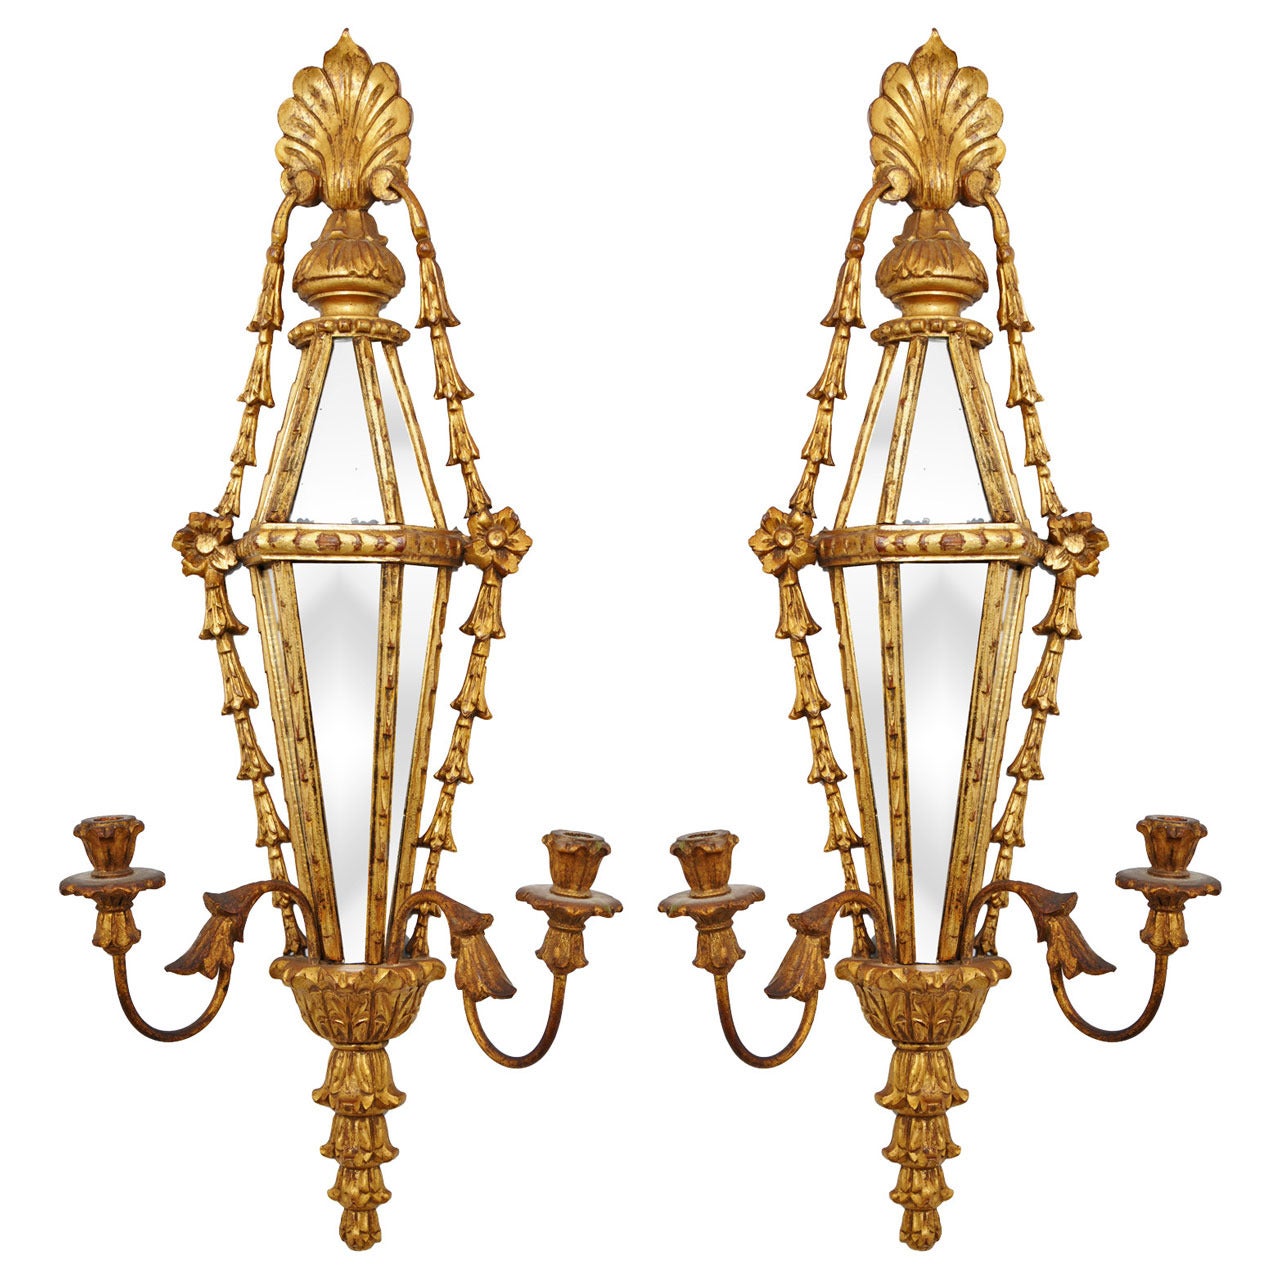 Pair of Mirrored Gilt Wood Sconces